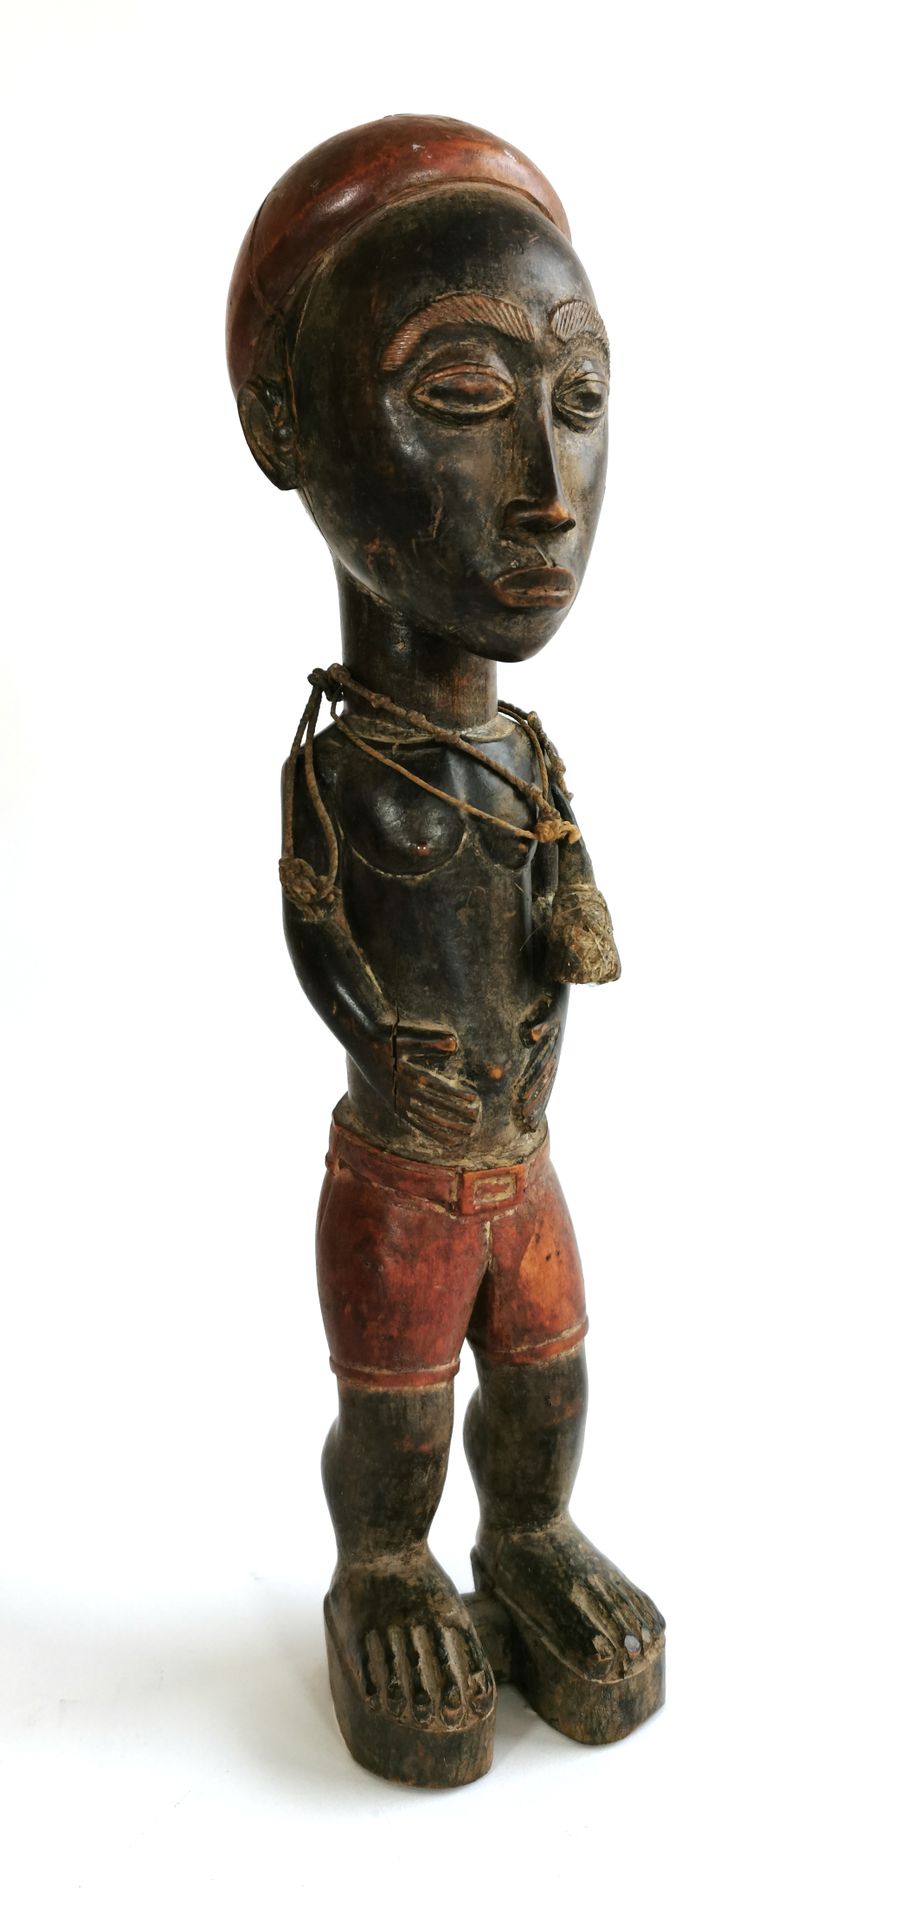 Null BAOULÉ (Ivory Coast)

Polychrome carved wooden statuette

H. 39 cm